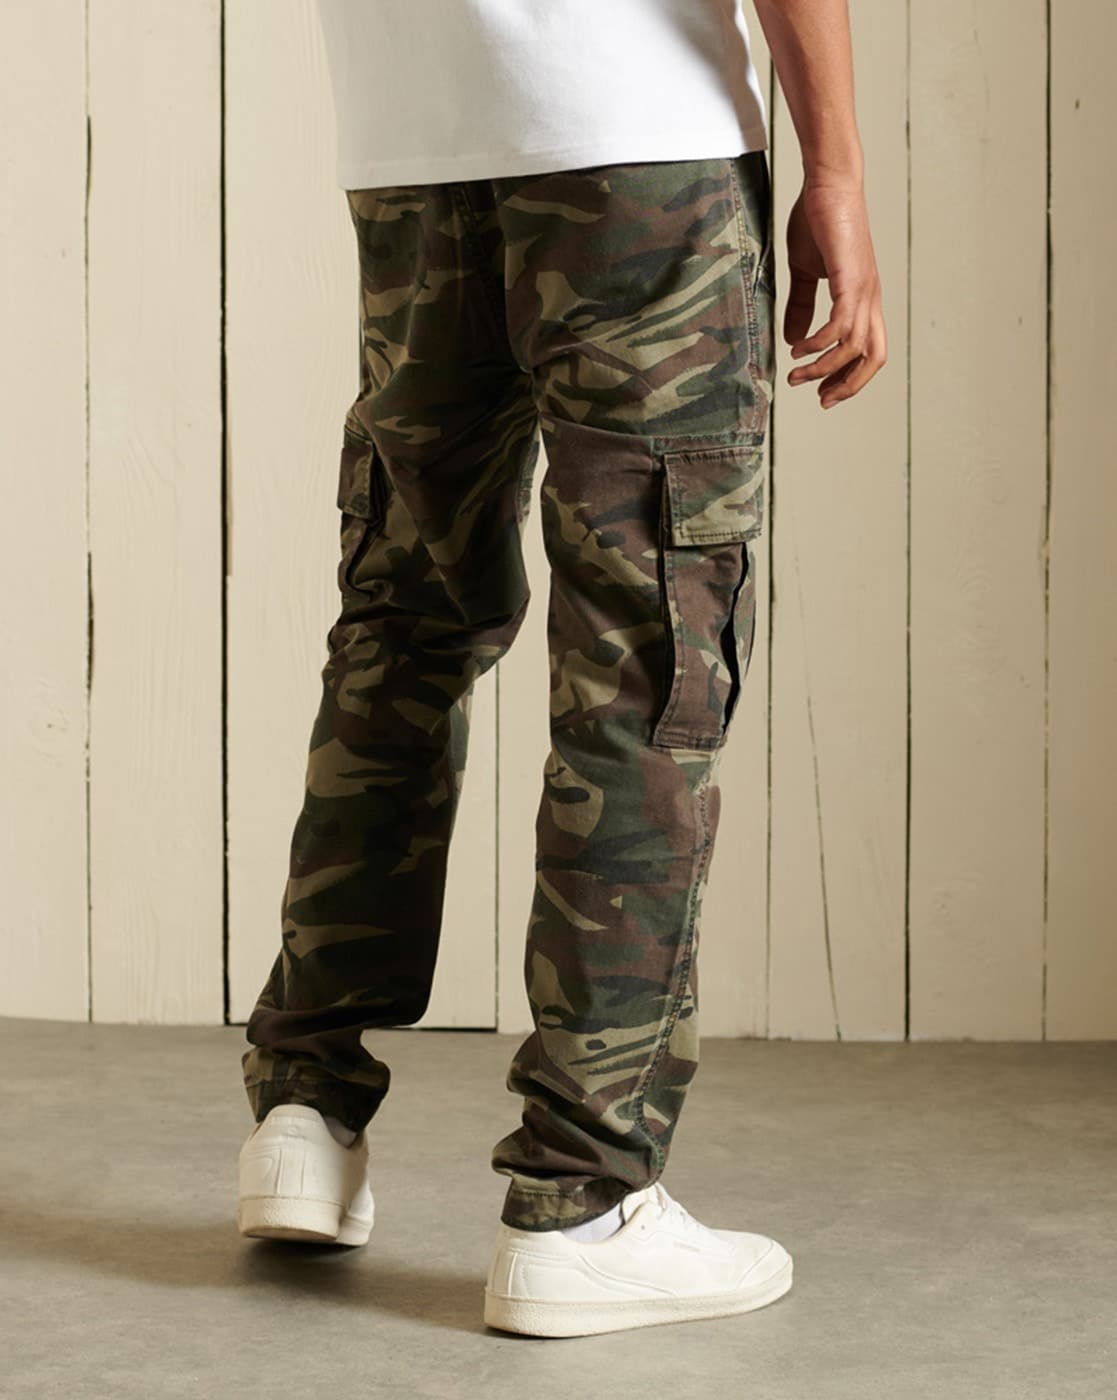 Buy Realtree Camo Pants Online In India  Etsy India